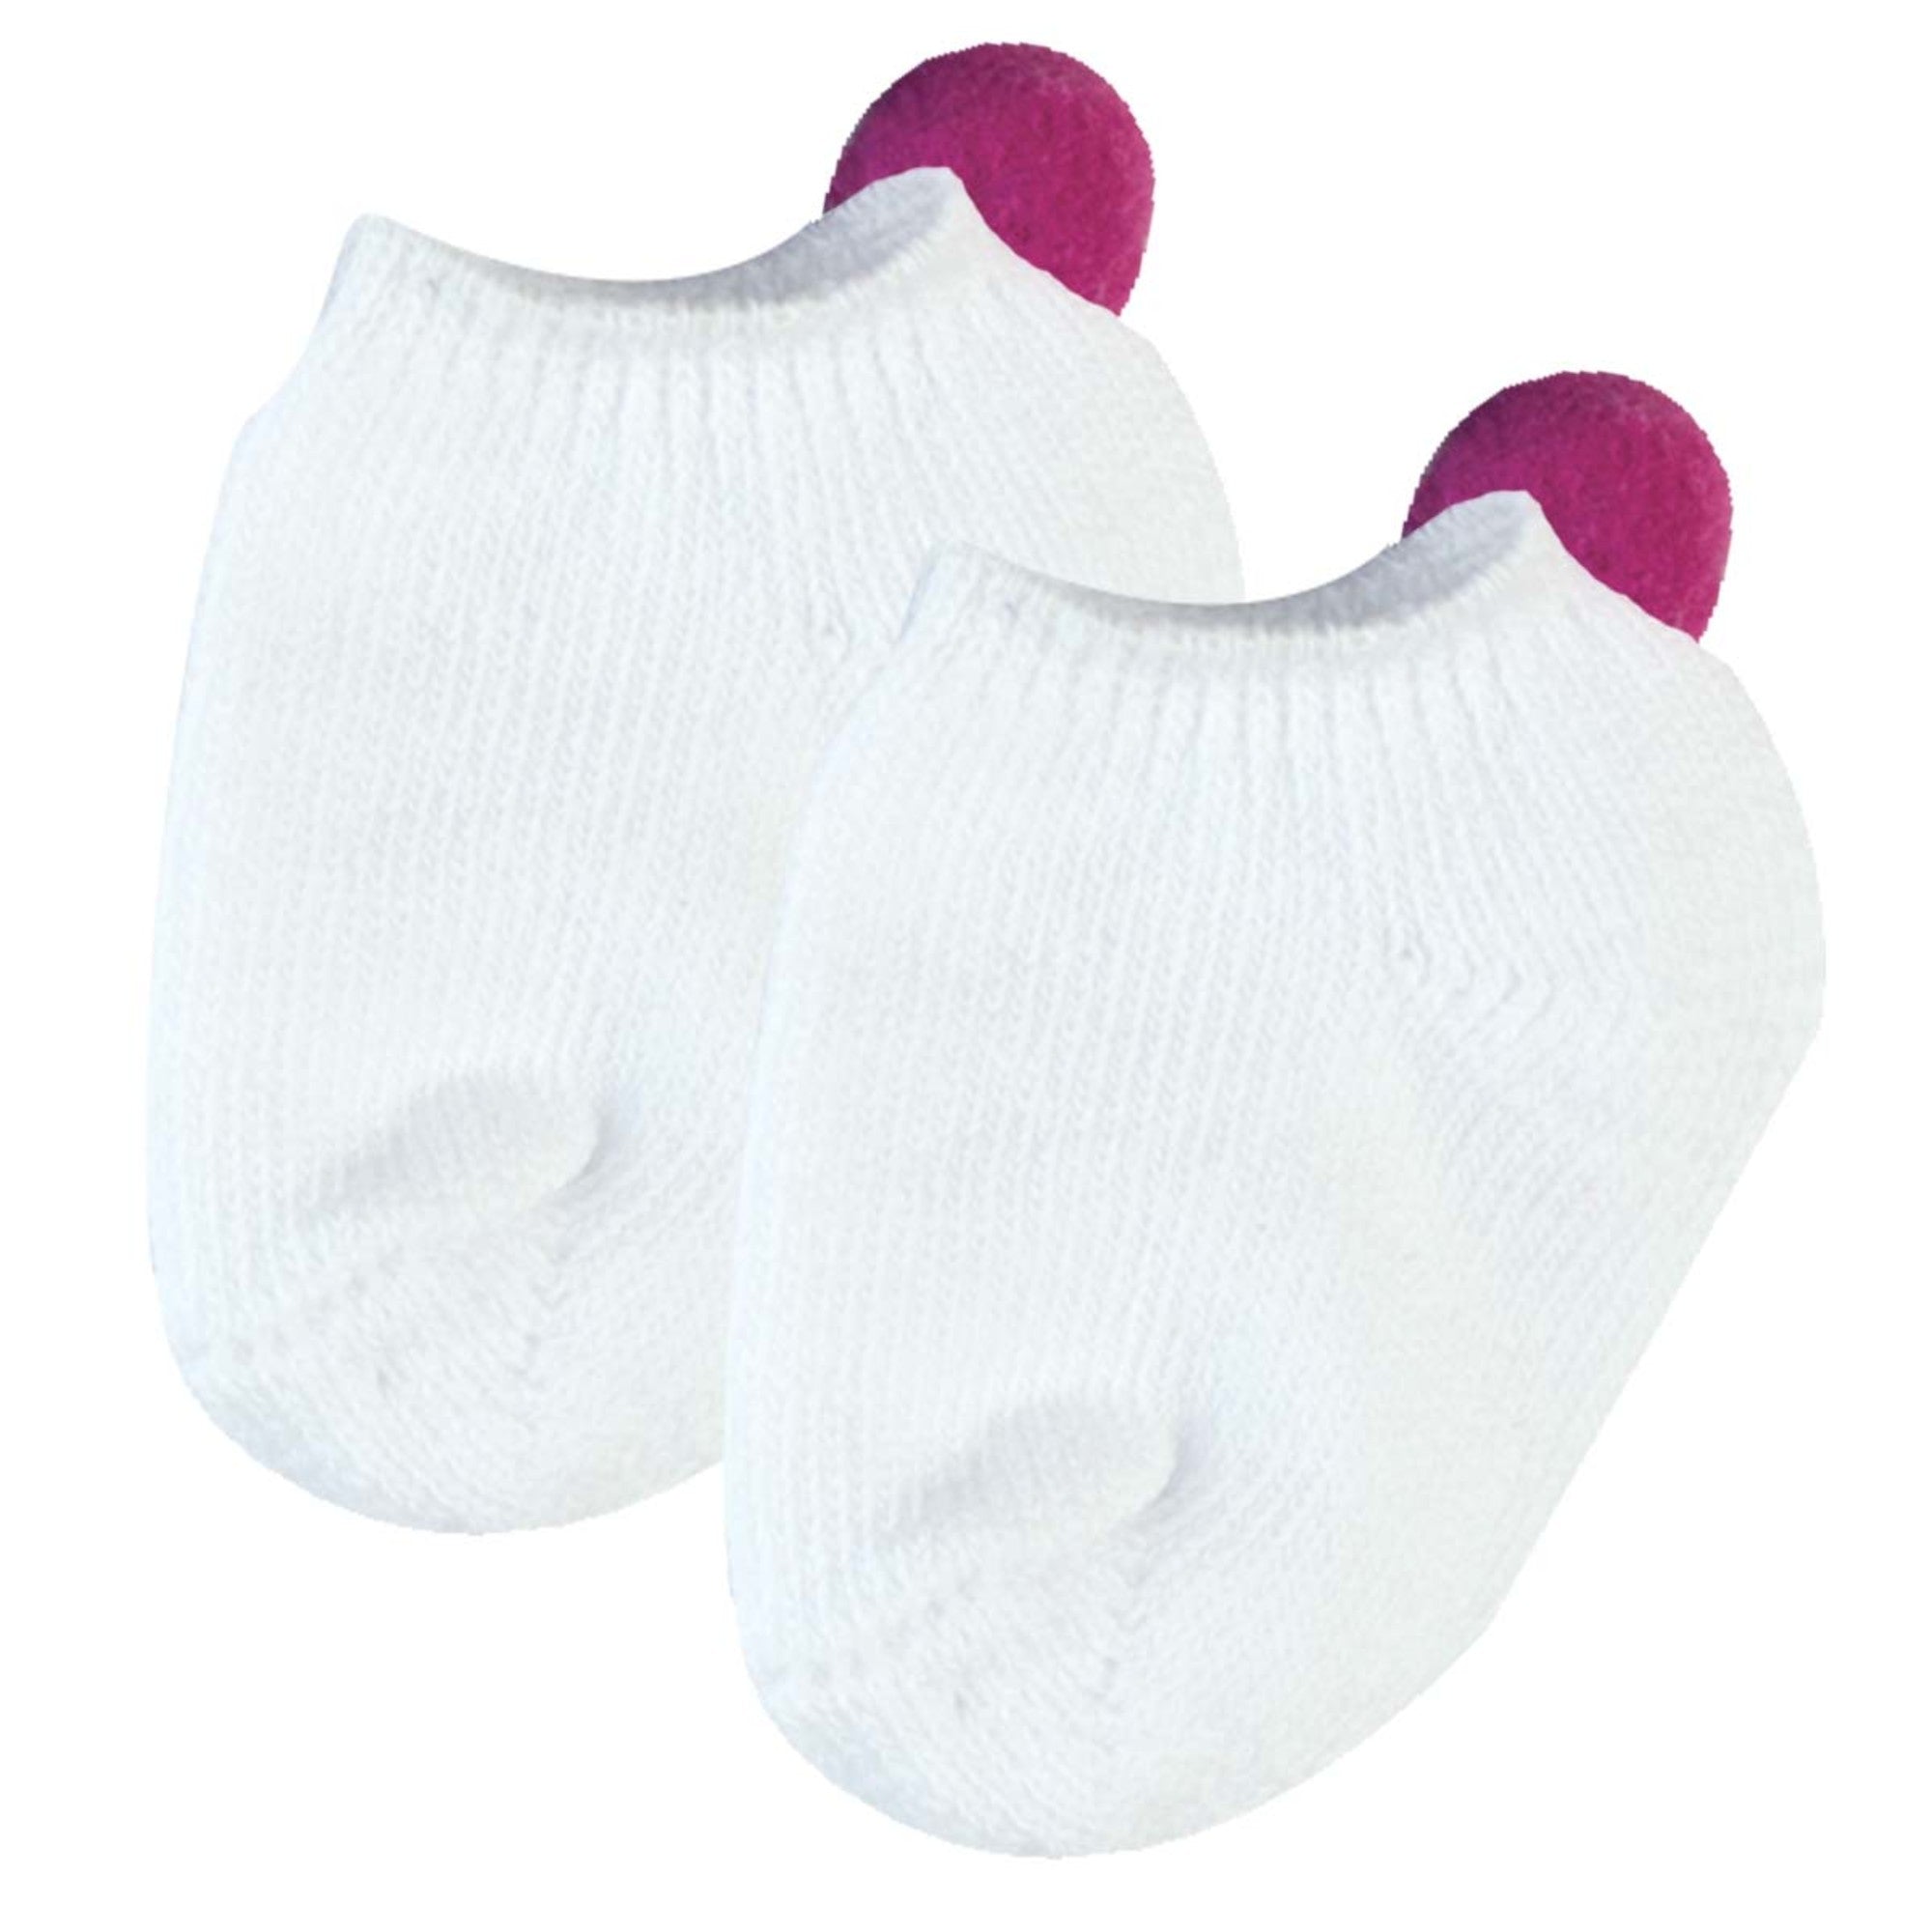 Sophia’s Mix & Match Wardrobe Essentials Basic Solid-Colored Ankle Socks with Pom-Poms for 18” Dolls, White/Hot Pink